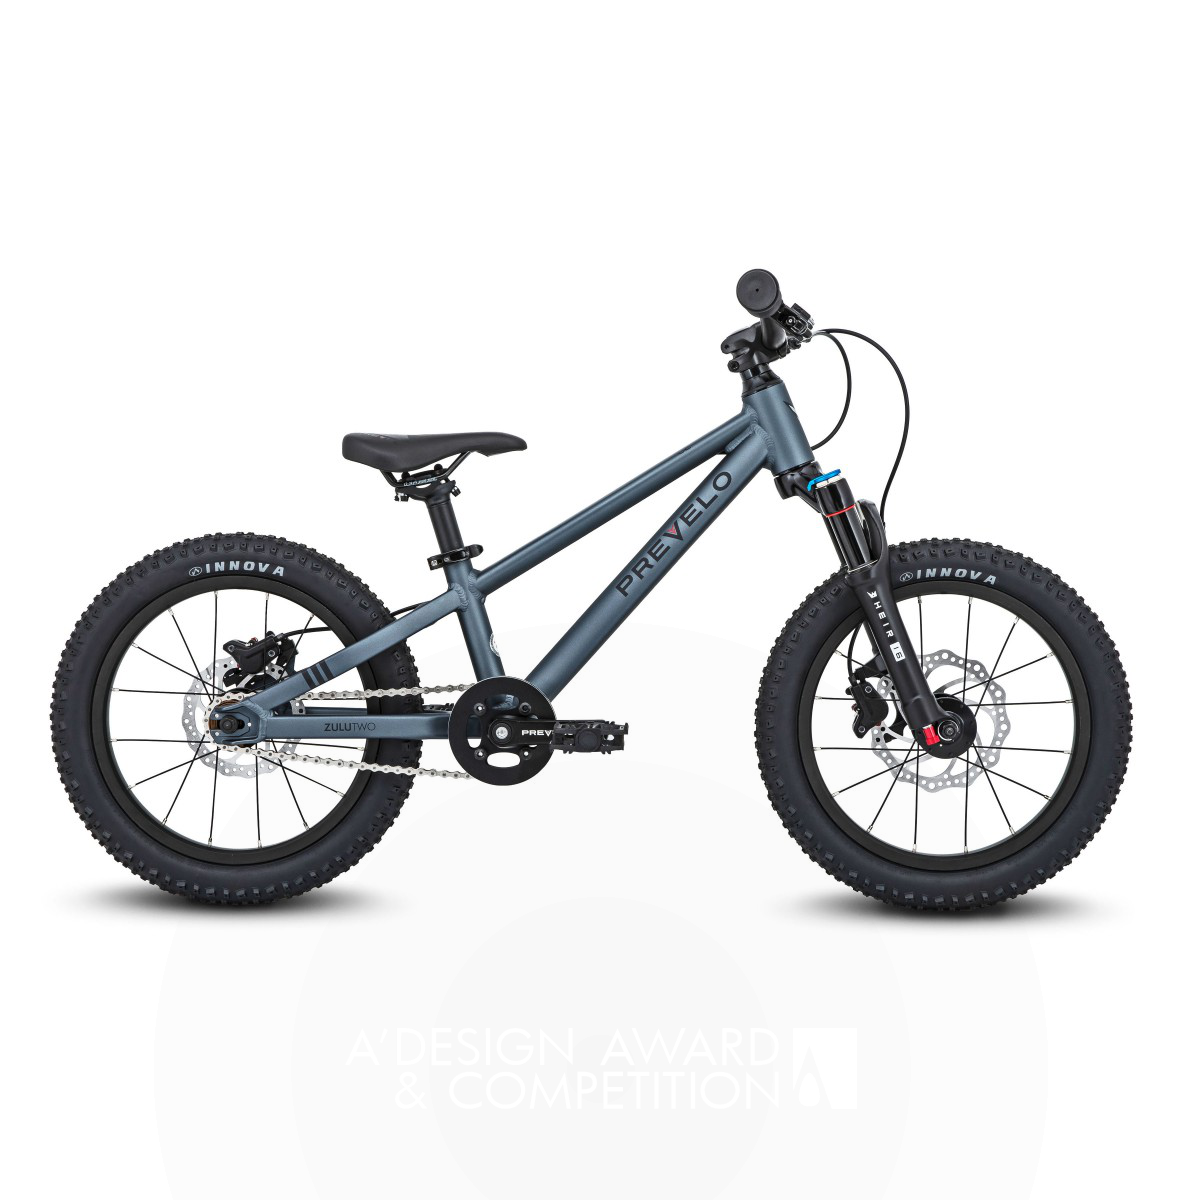 Prevelo Bikes wins Golden at the prestigious A' Baby, Kids and Children's Products Design Award with Zulu Two Heir Mountain Bike for Kids.